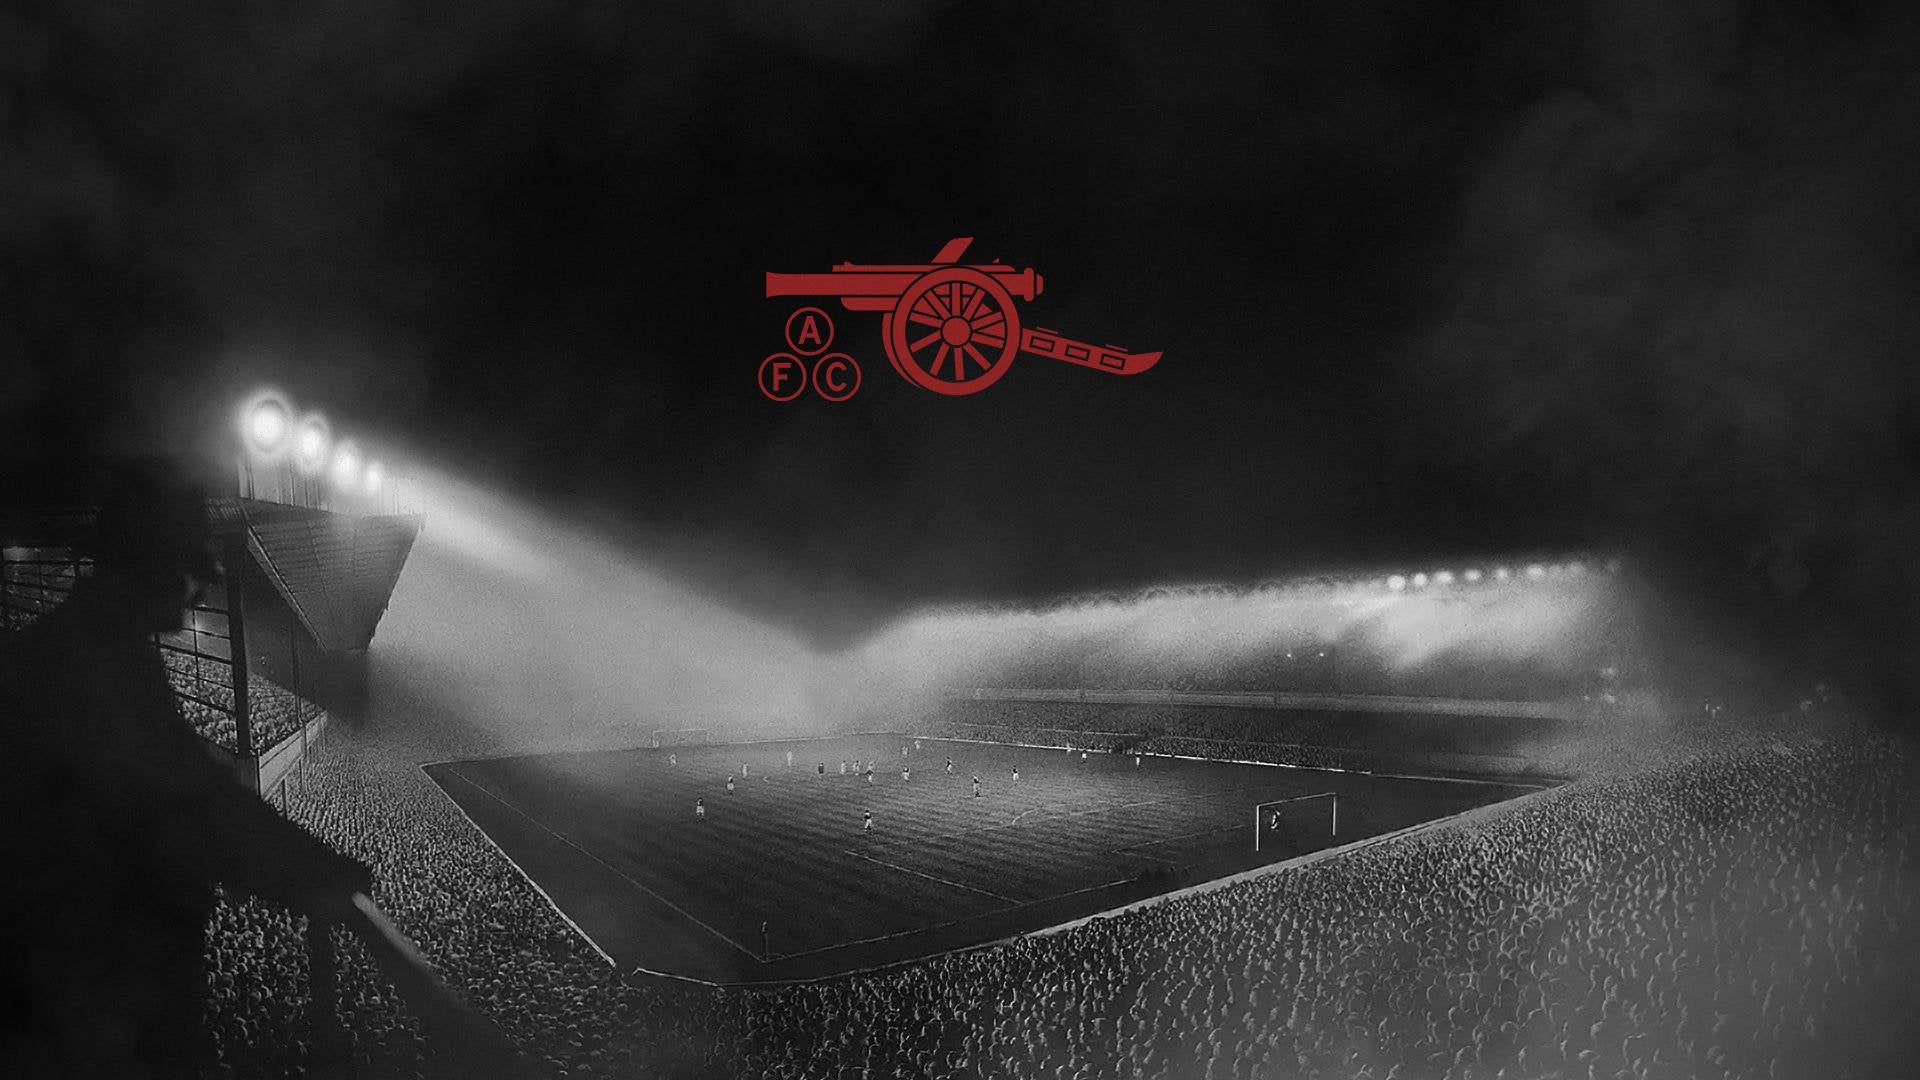 A Highbury wallpaper I made, thought I should upload it here